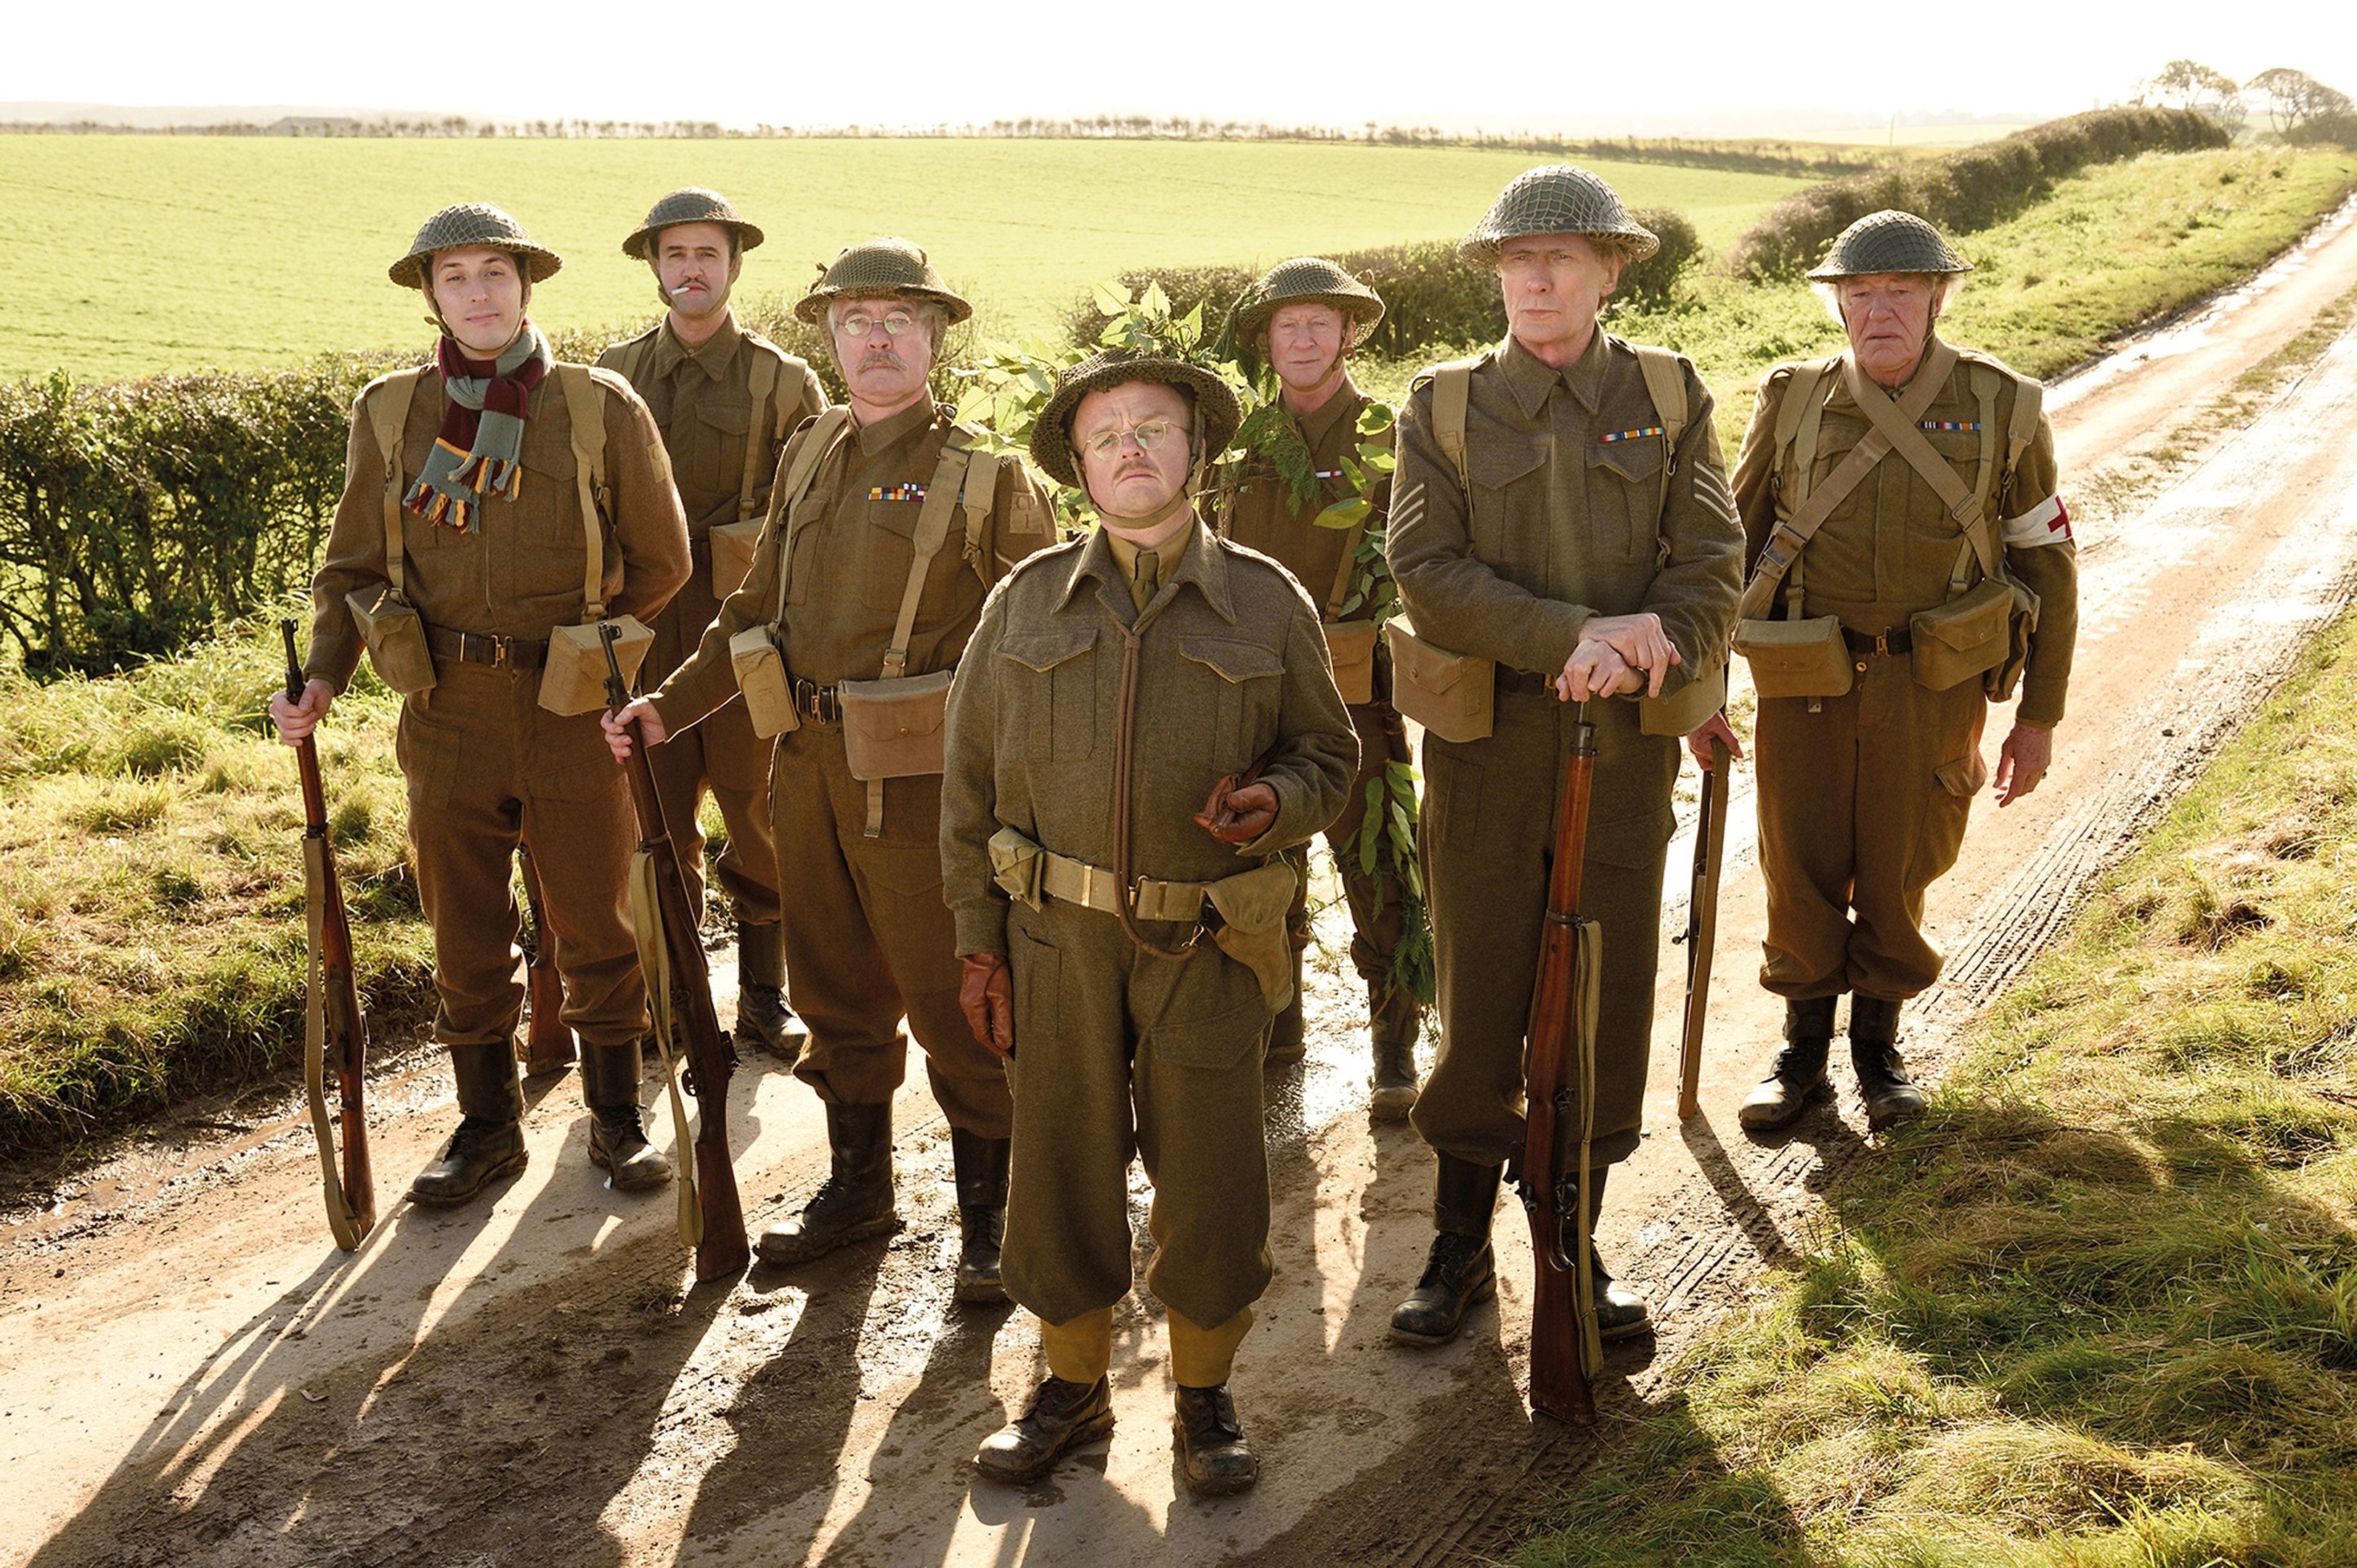 Bill (third from right) was thrilled to join the cast for the Dad’s Army revival (PA Photo)